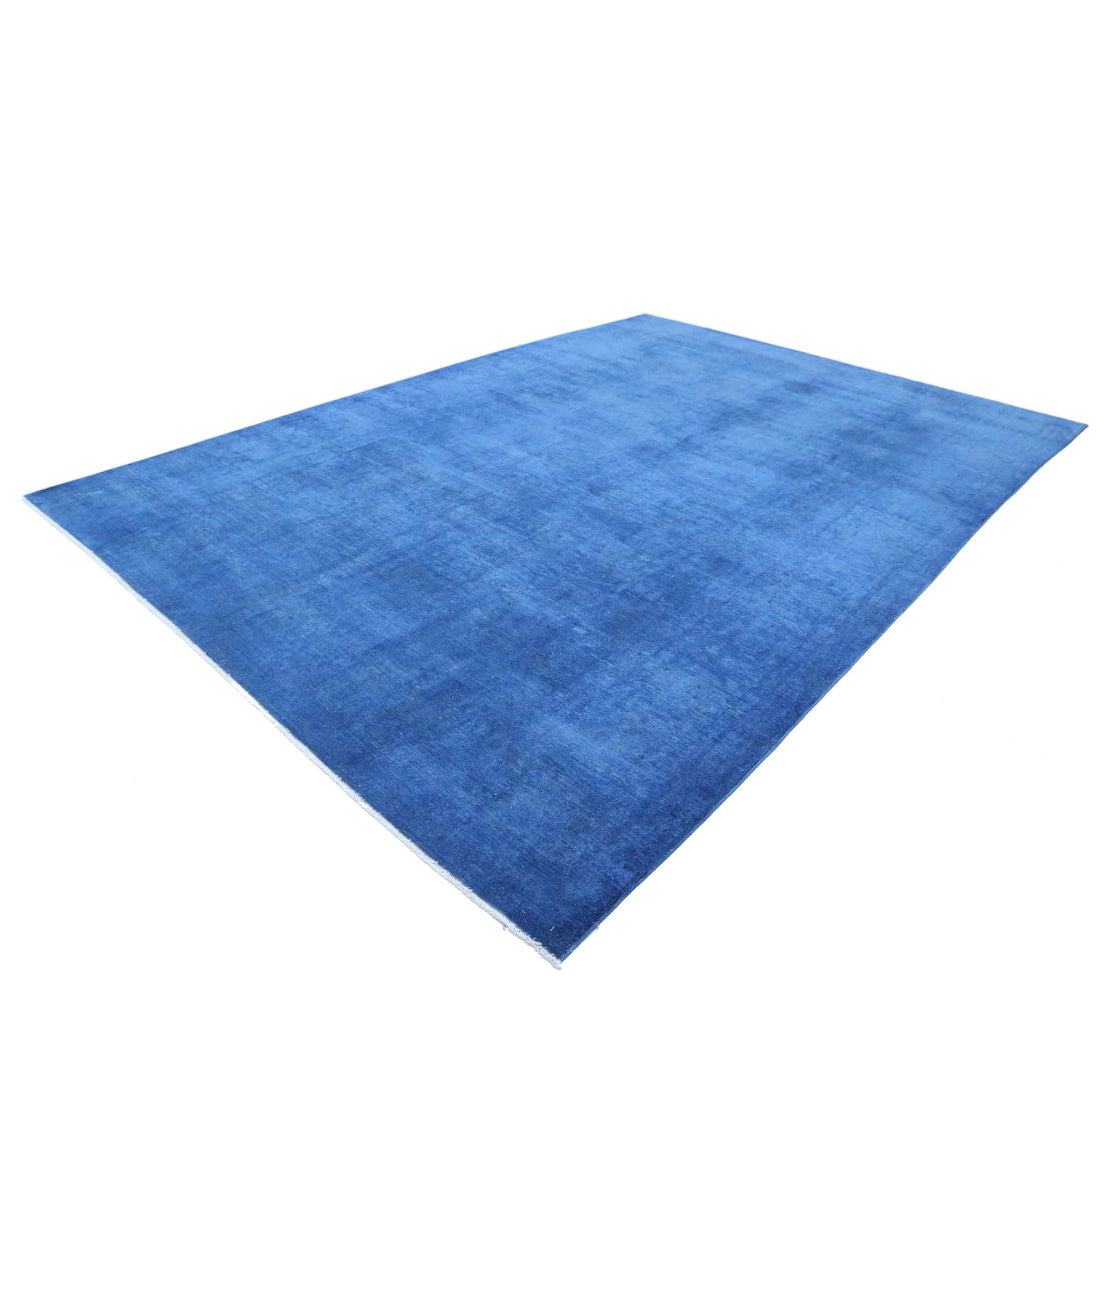 Hand Knotted Fine Overdye Wool Rug - 9'7'' x 13'6'' 9'7'' x 13'6'' (288 X 405) / Blue / Blue